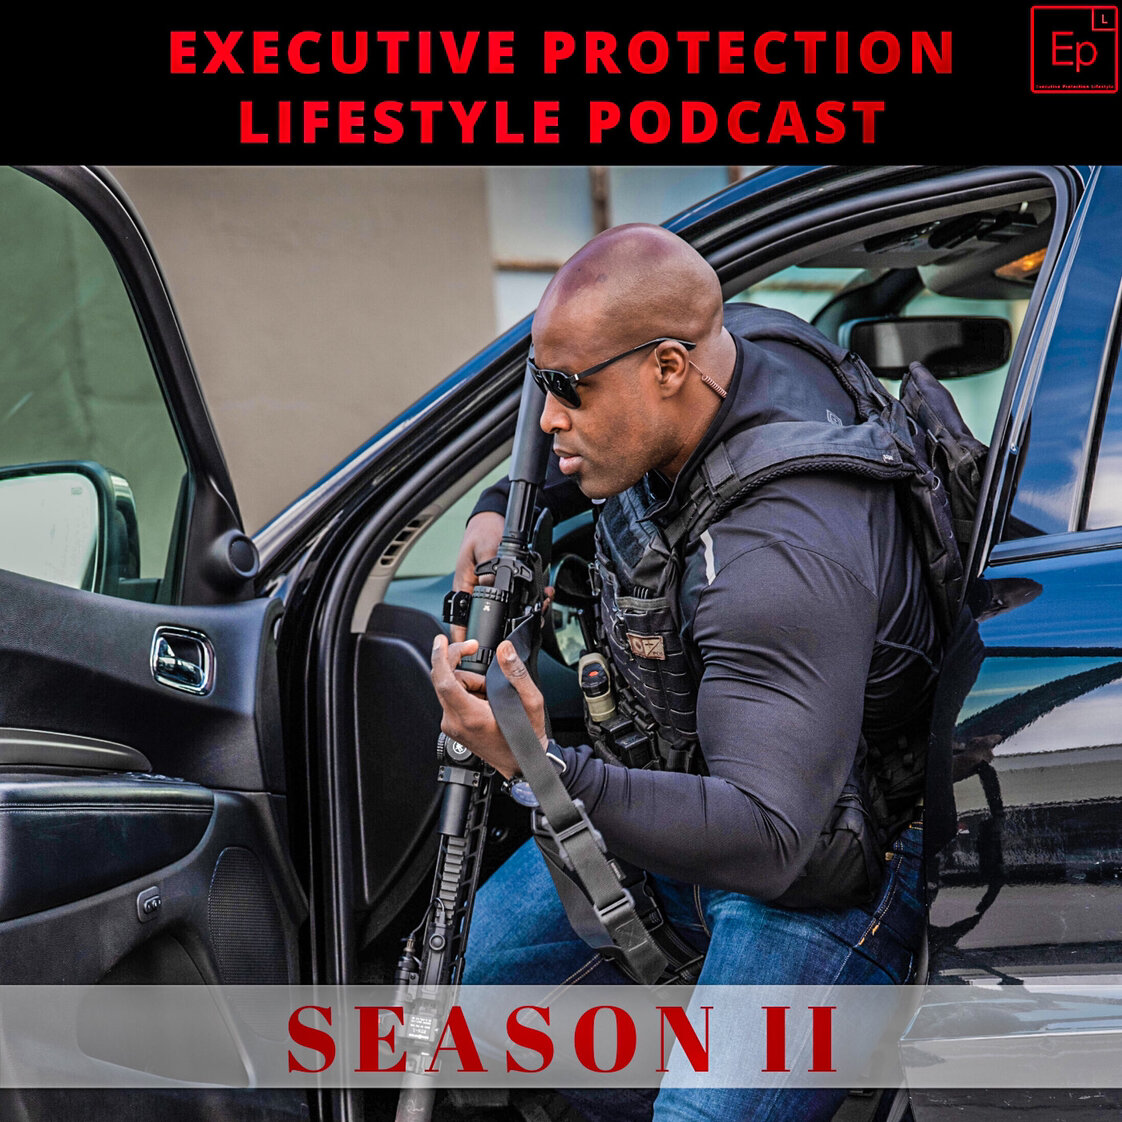 Executive Protection Lifestyle Podcast